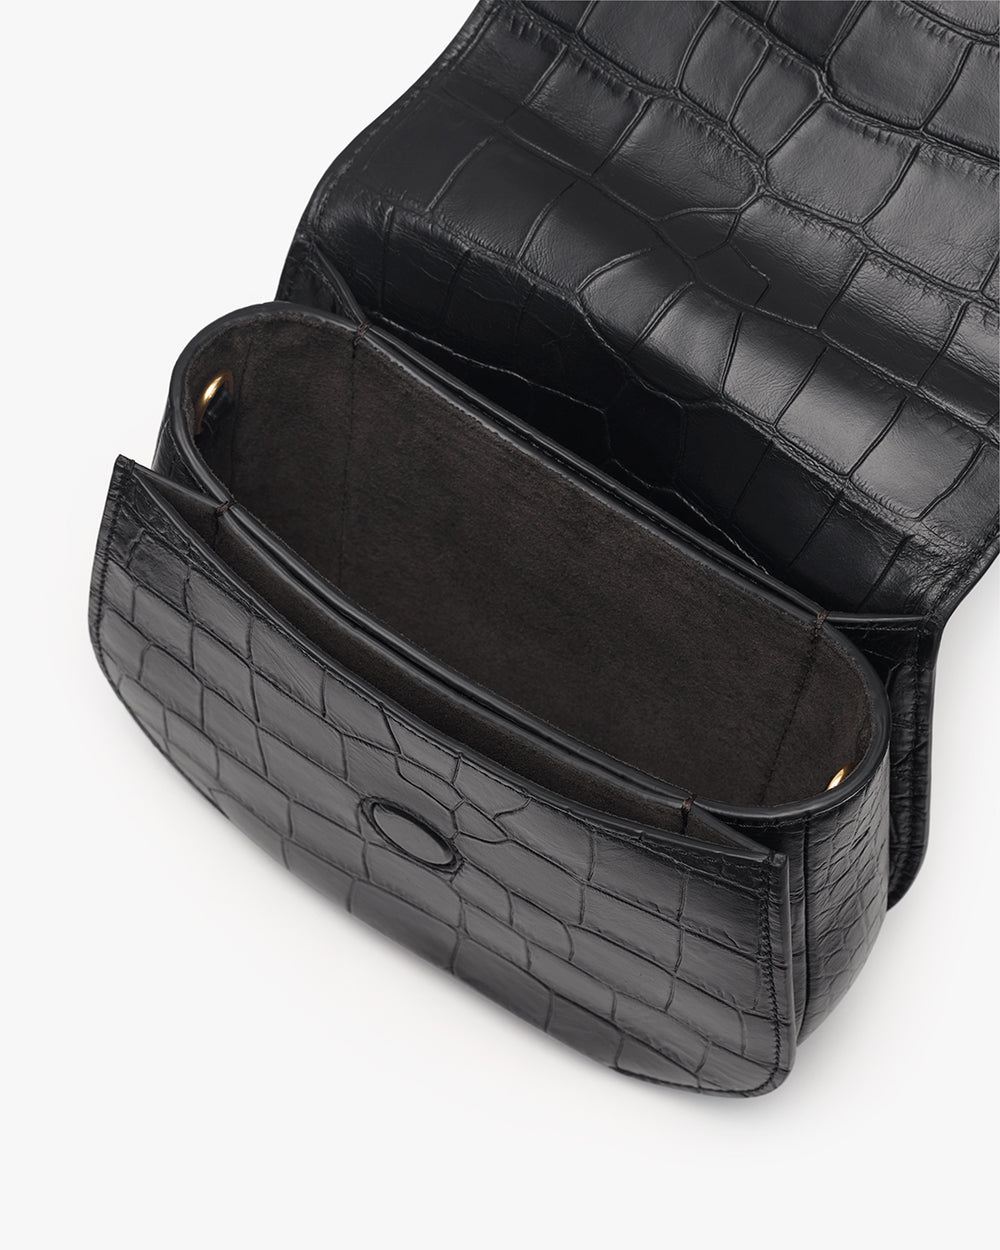 Open croc-embossed leather handbag with visible interior.